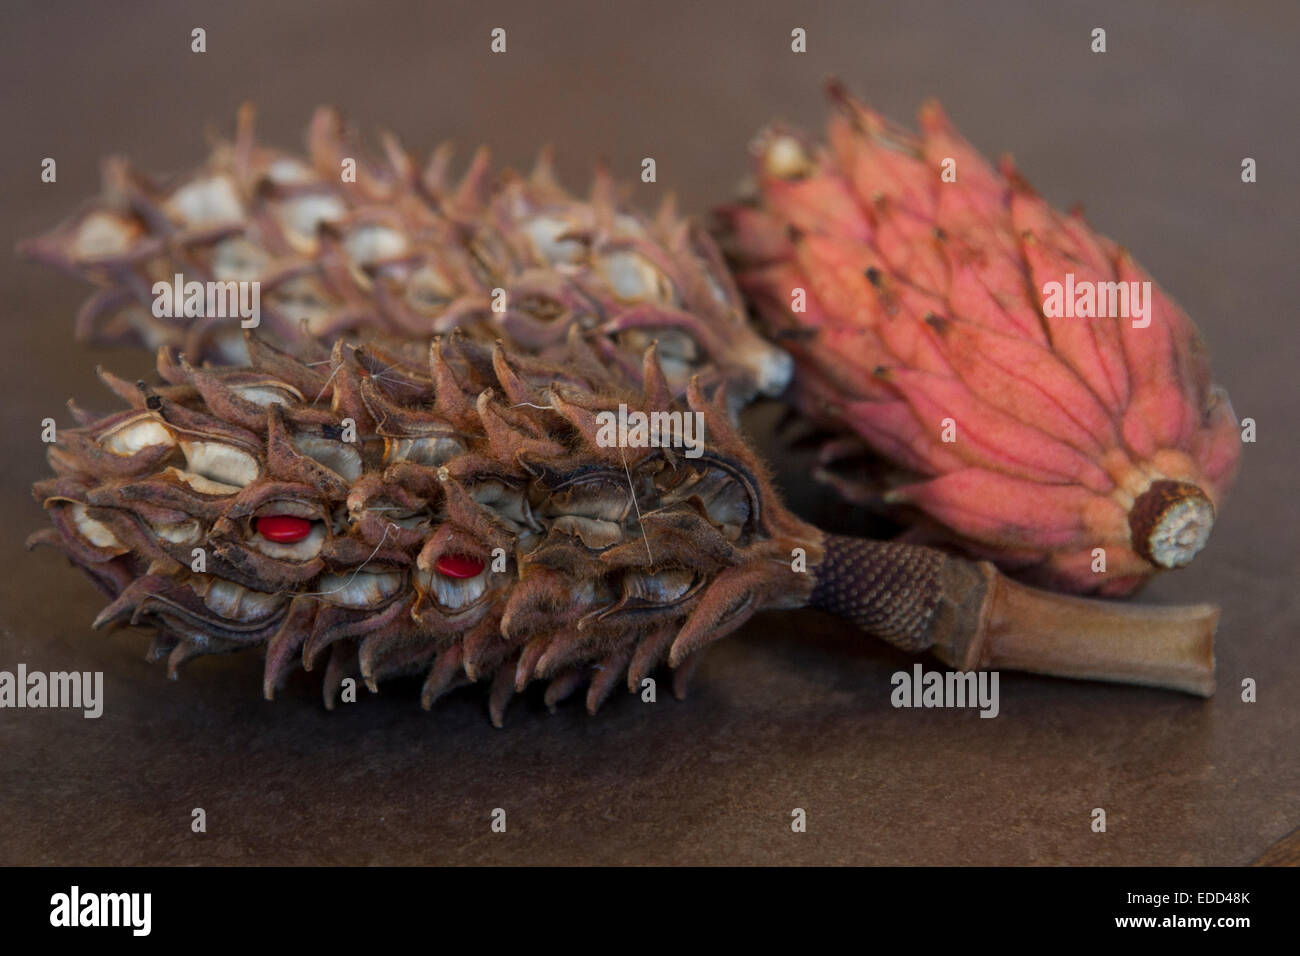 Still life of three seed pods, found on the street in Berkeley California. Stock Photo